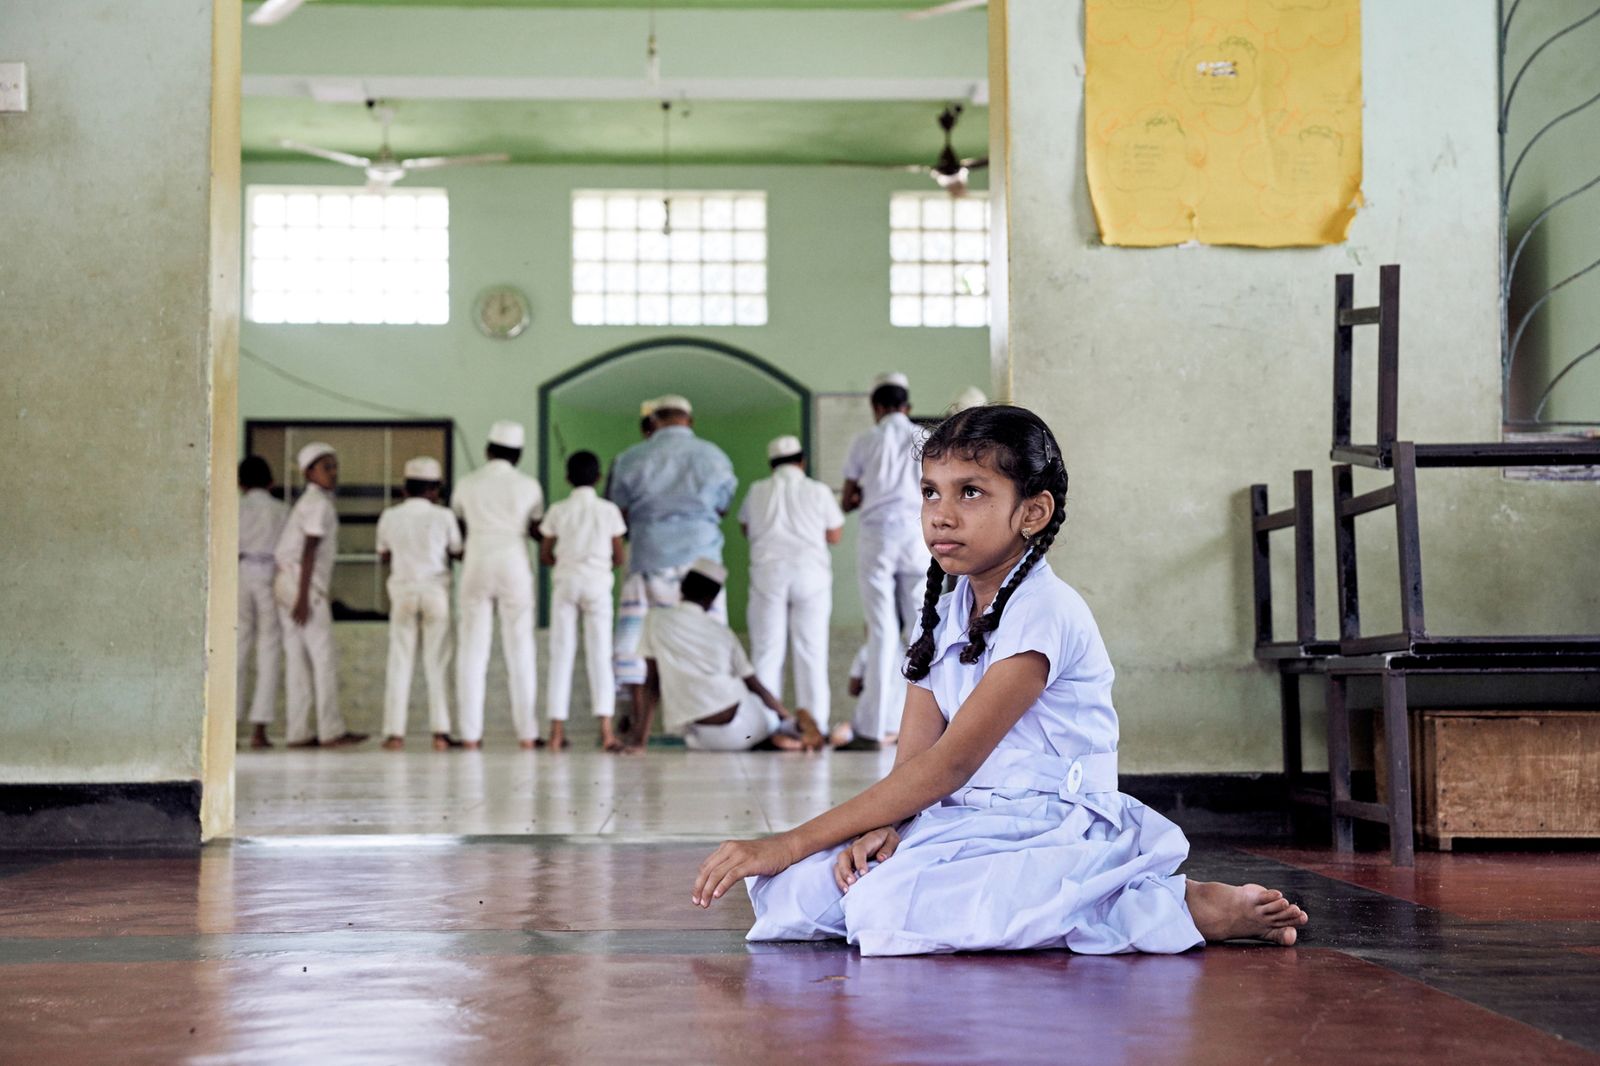 © Kai Yokoyama - Ilma prays at the school's mosque. Deaf, she cannot hear herself or the voices of others during the call to prayer.